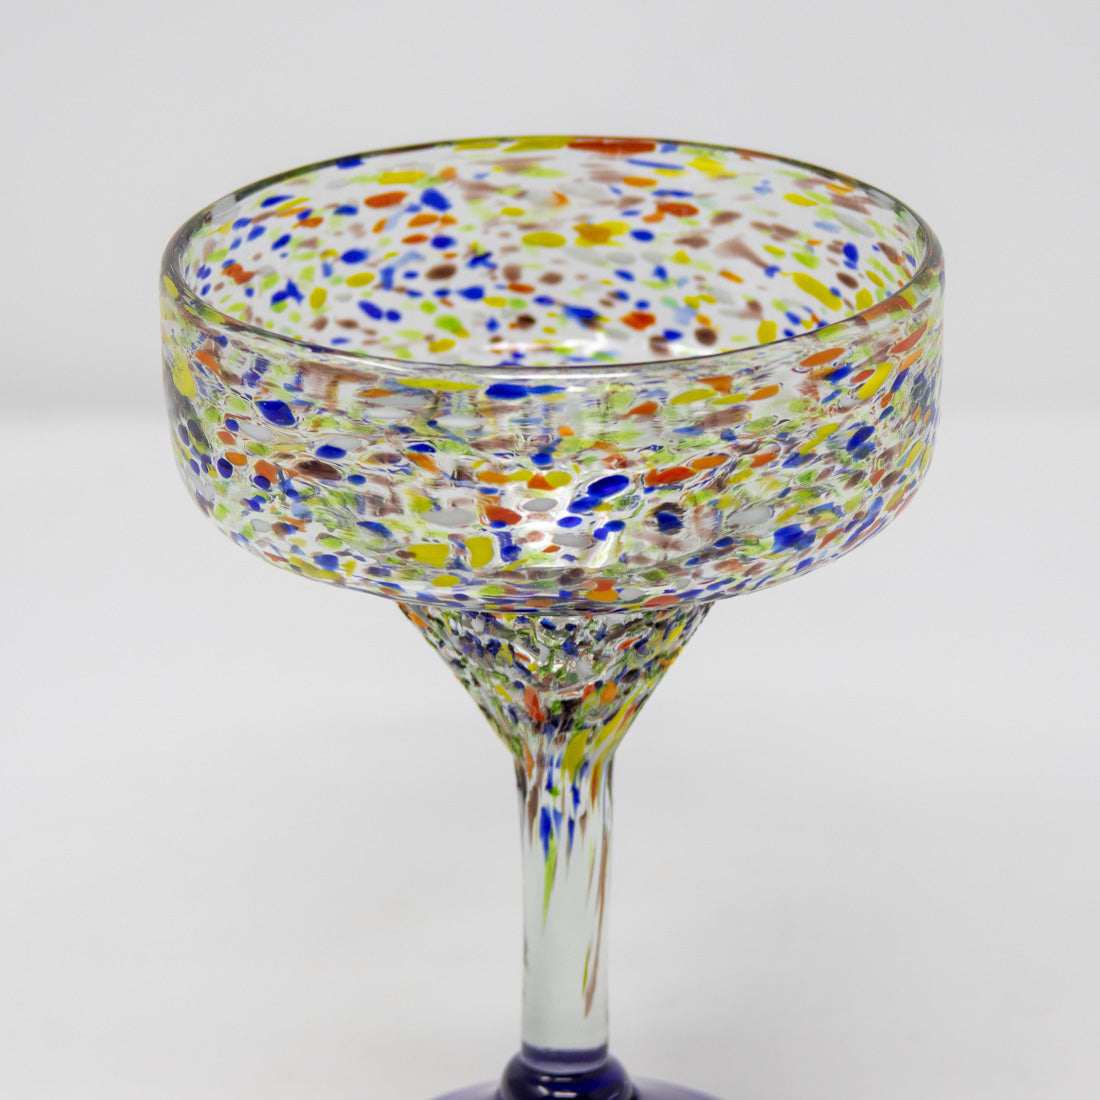 Close up of a margarita glass with confetti rock details